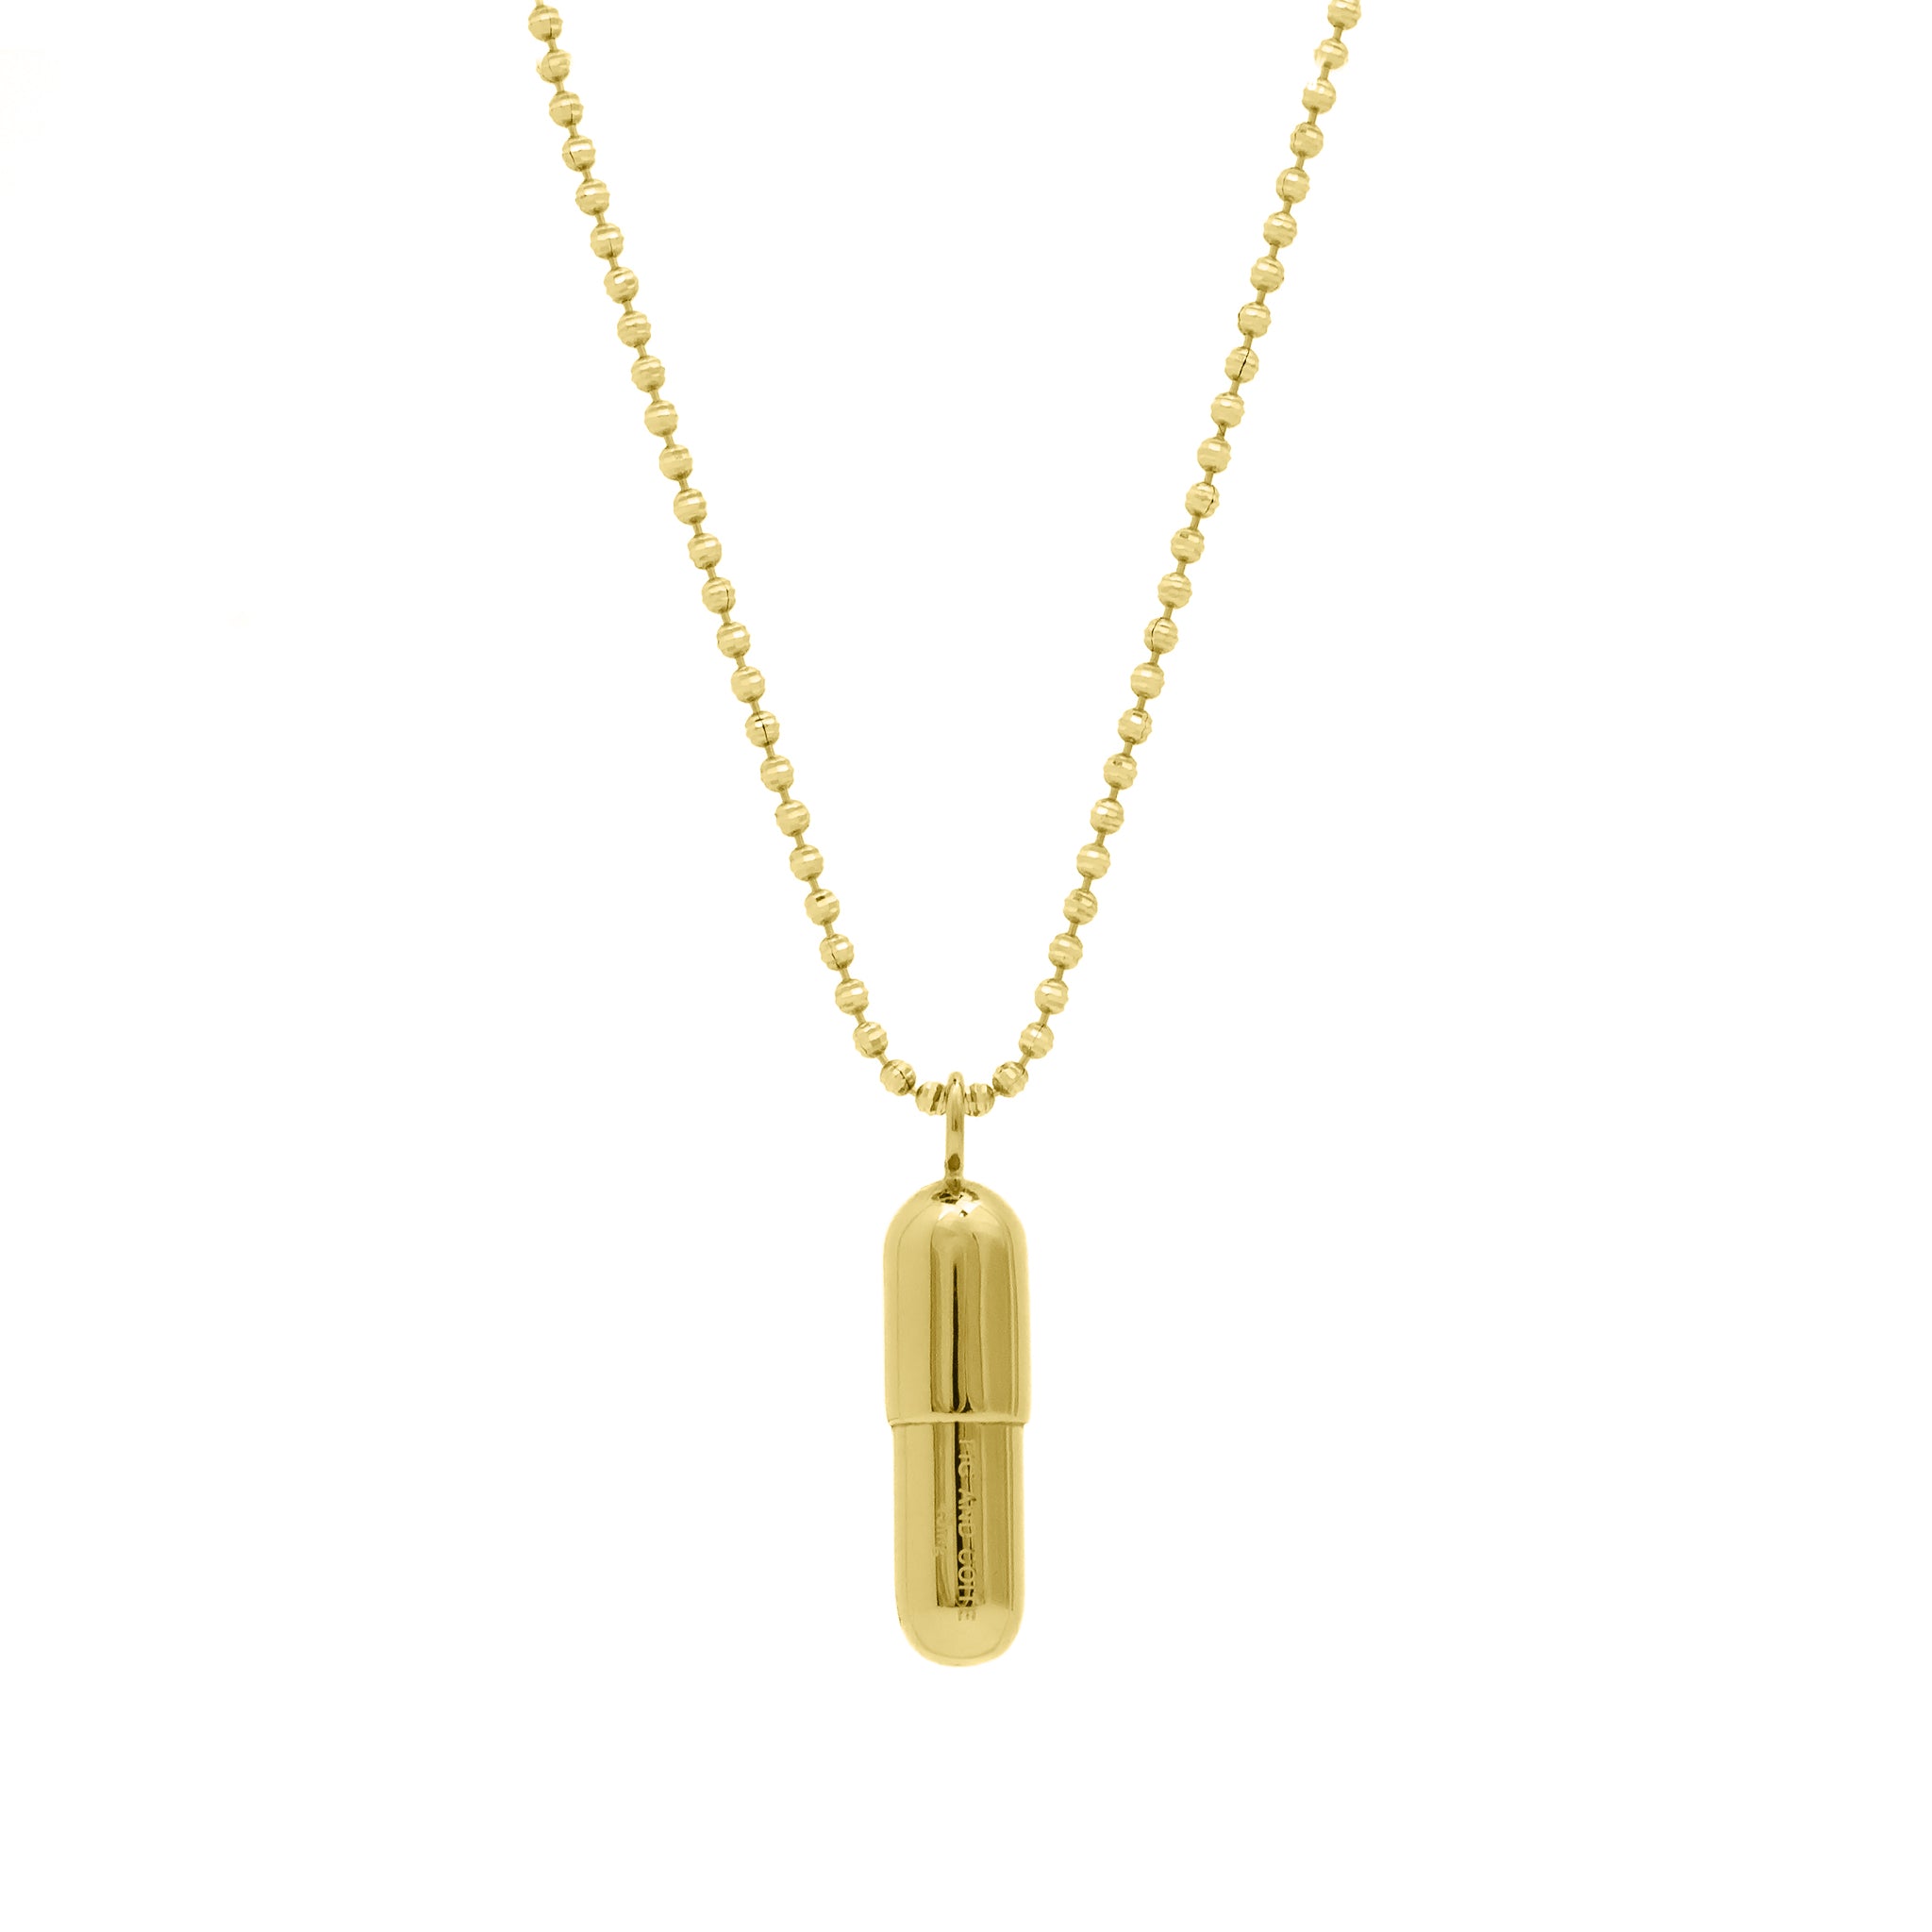 Gold Capsule Pill Necklace